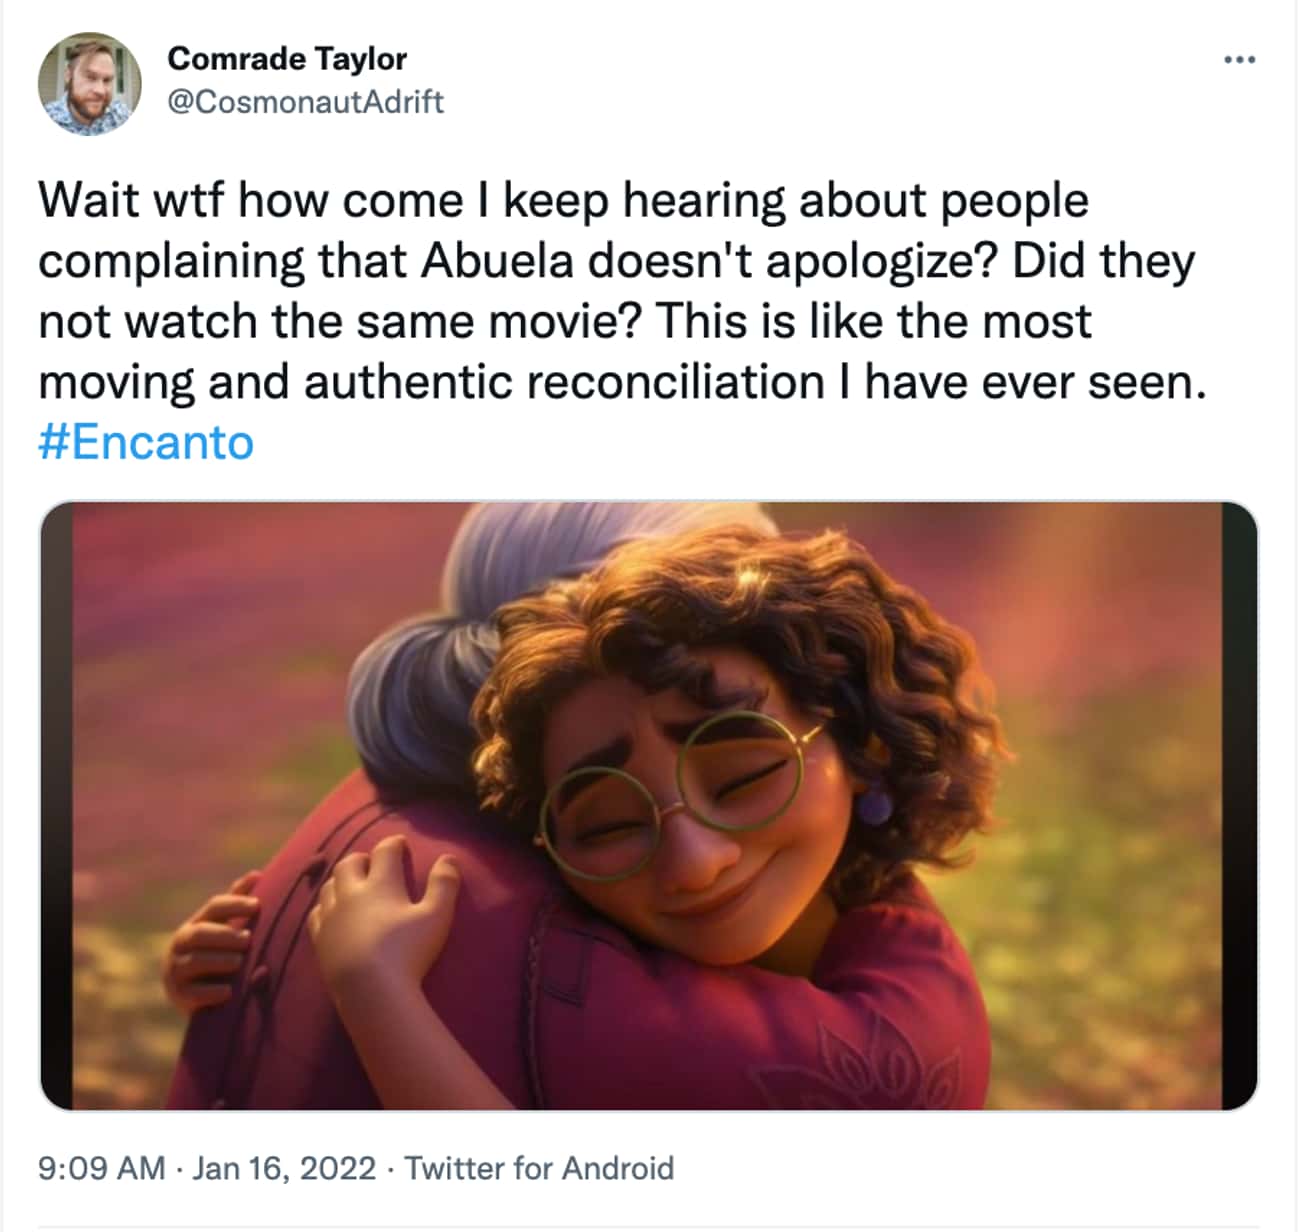 Abuela’s Apology Was Moving And Authentic 